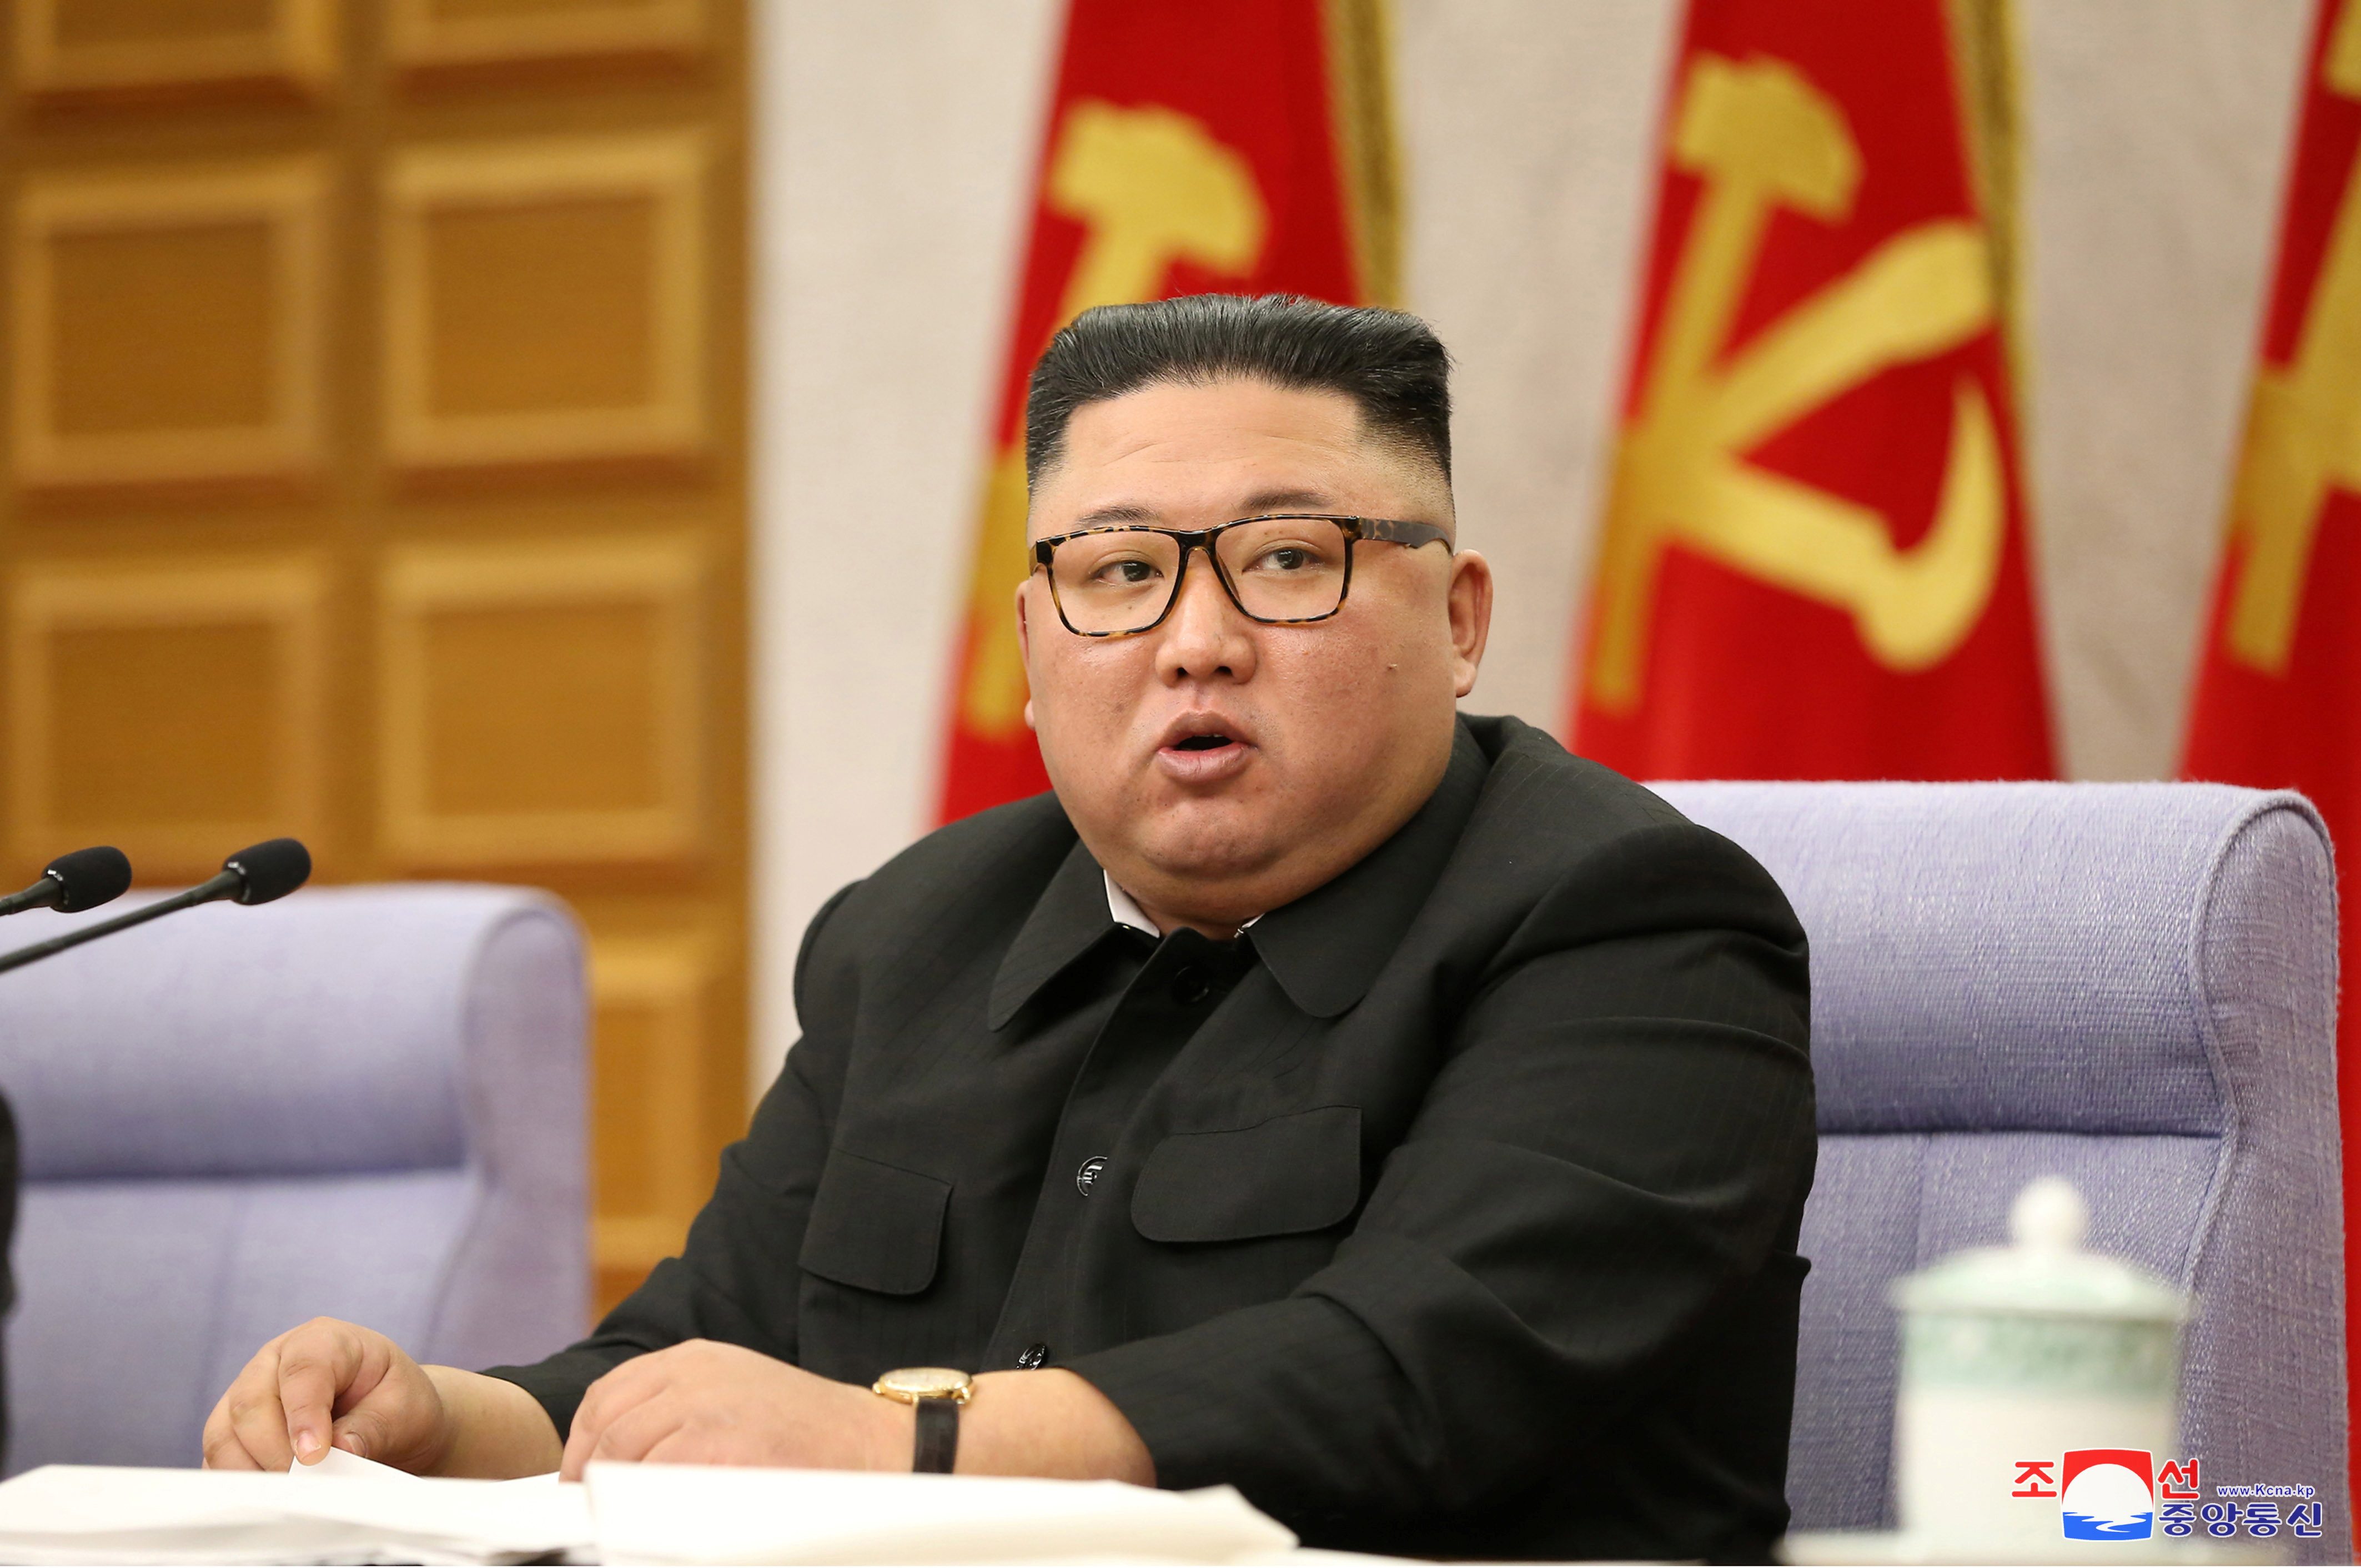 North Korea’s Kim says to prepare for ‘both dialogue and confrontation’ with US – KCNA